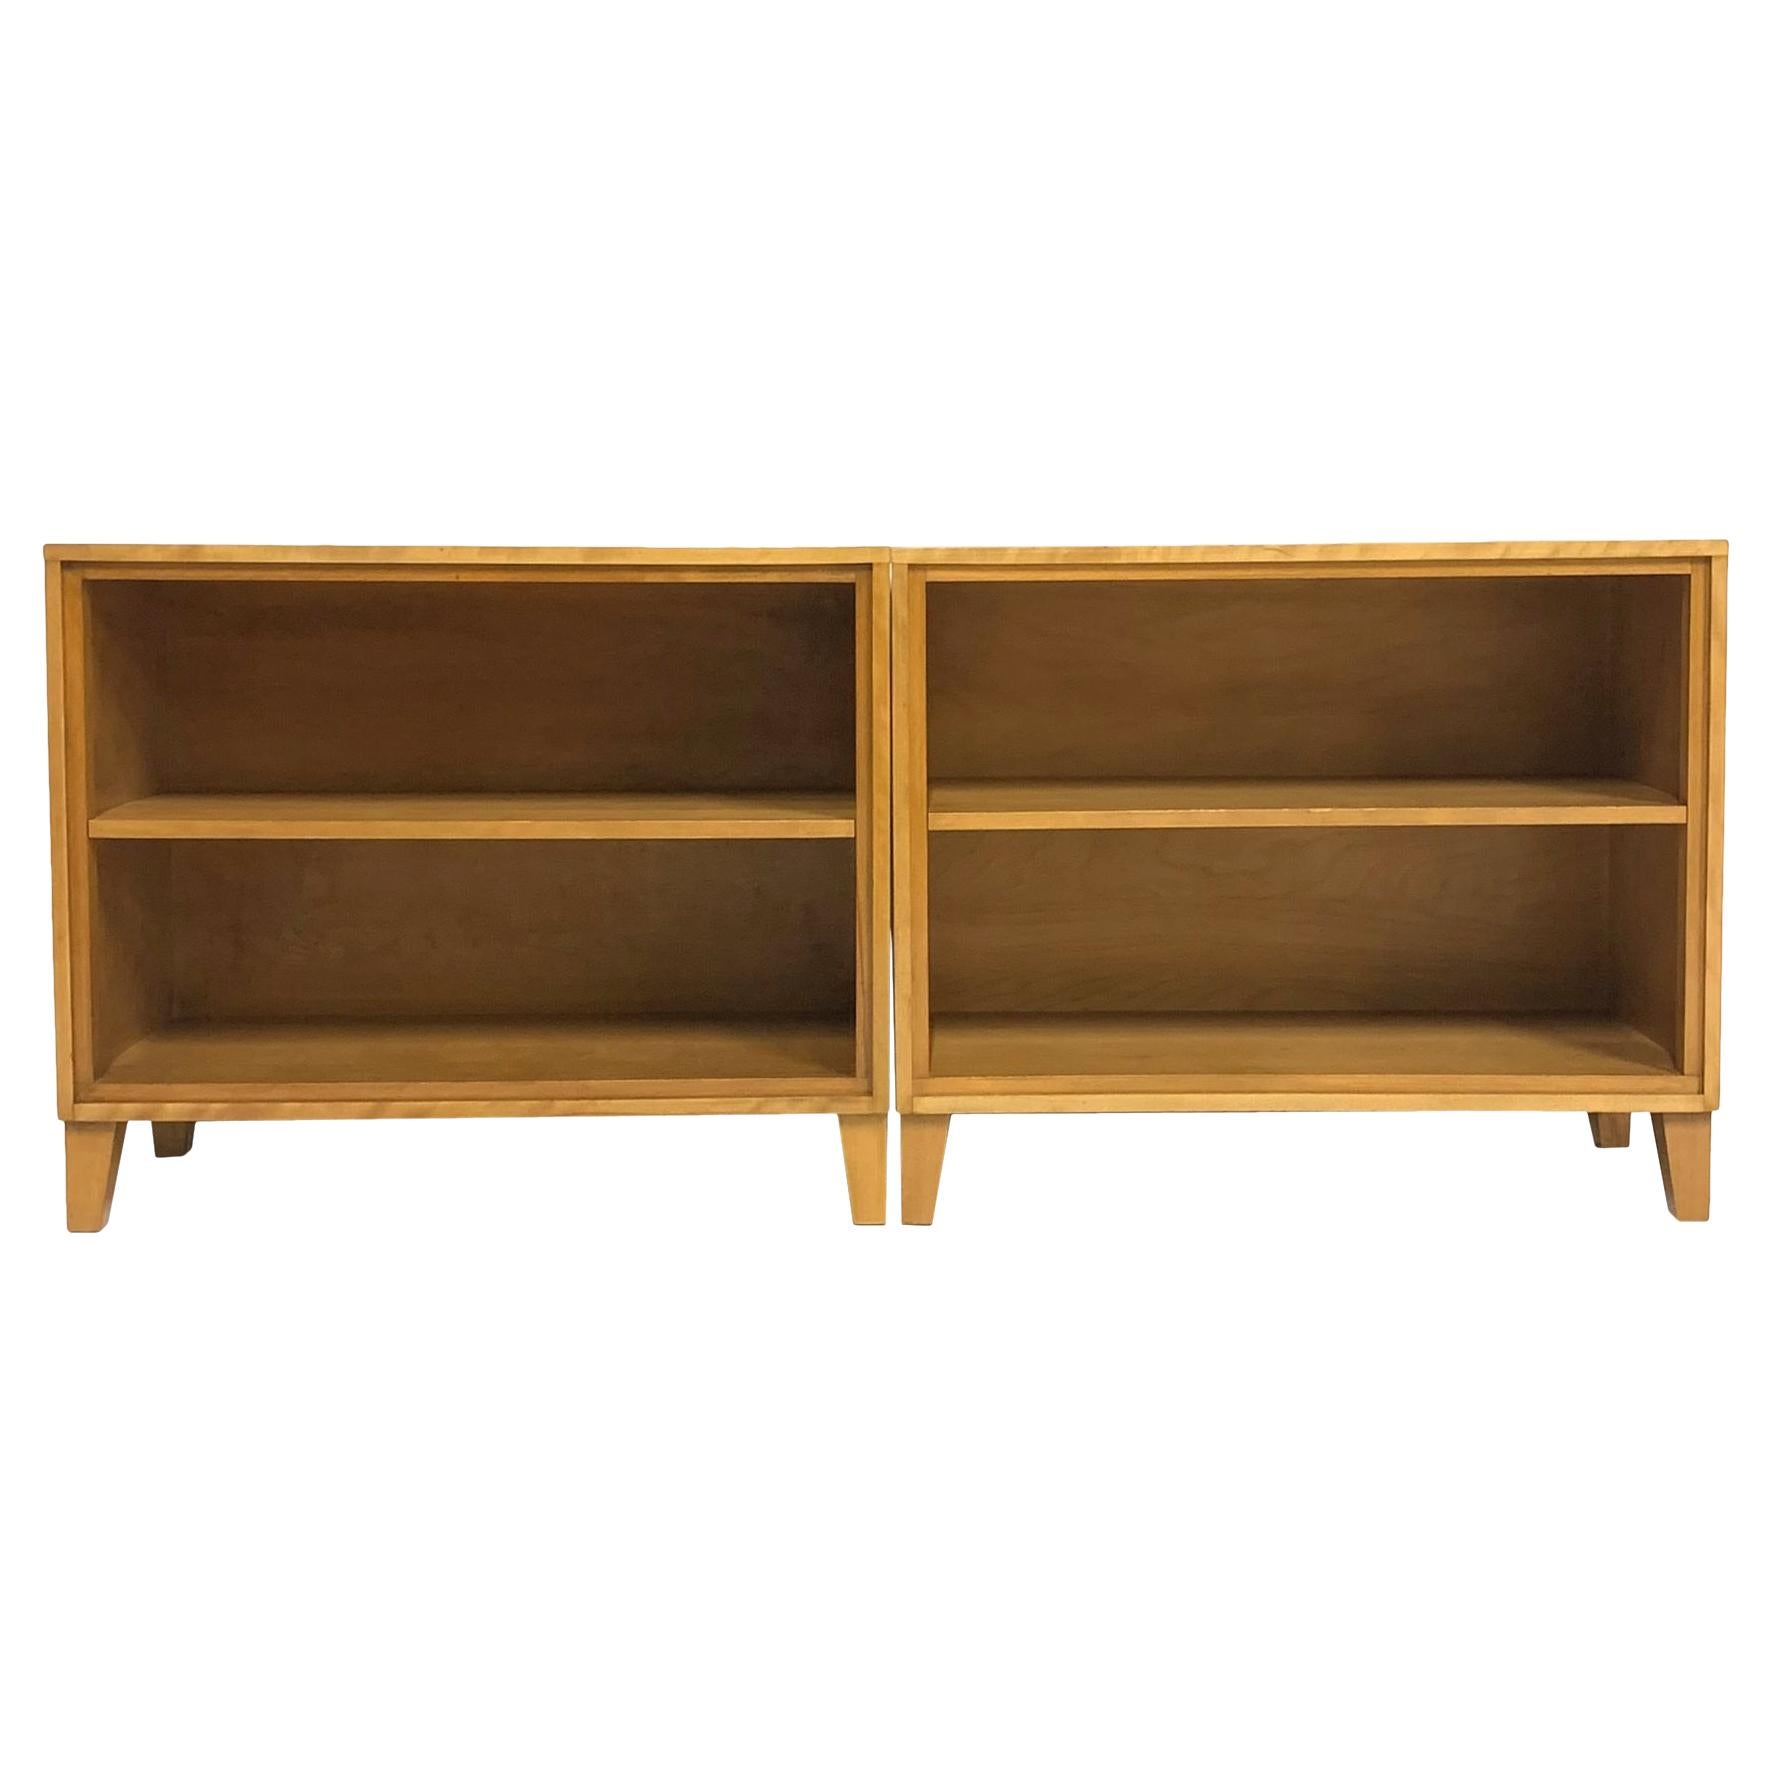 Russel Wright for Conant Ball Blonde Maple Bookcases Shelves Display Shelf, Pair